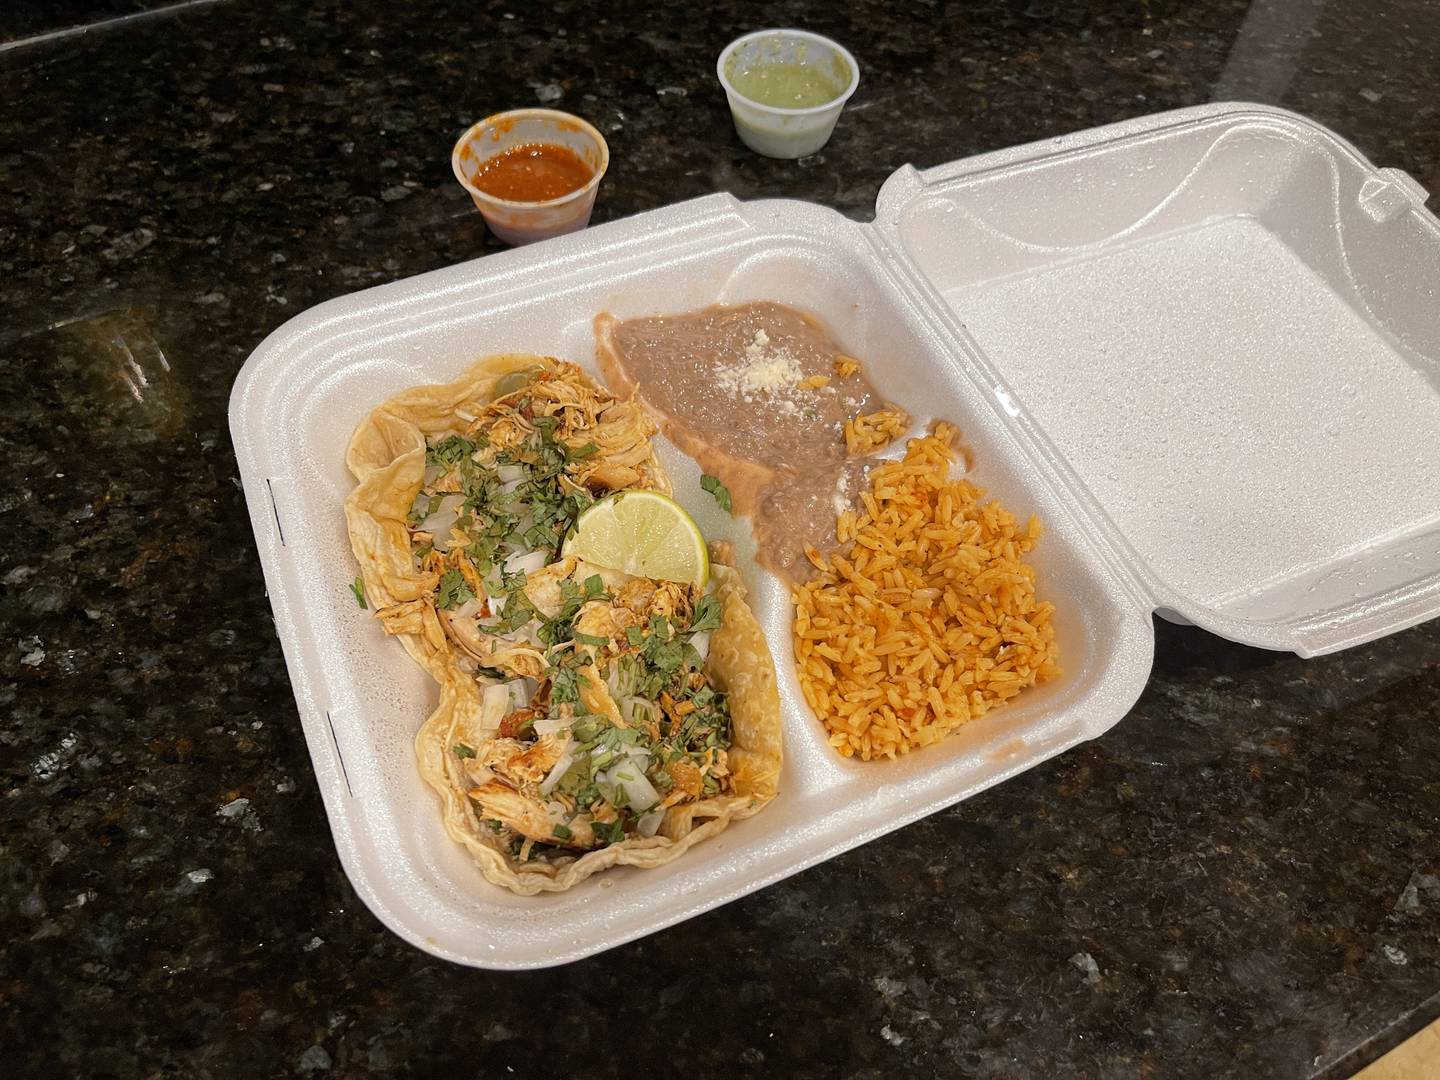 The chicken tacos are a value pick, as its a good amount of food and not pricey.